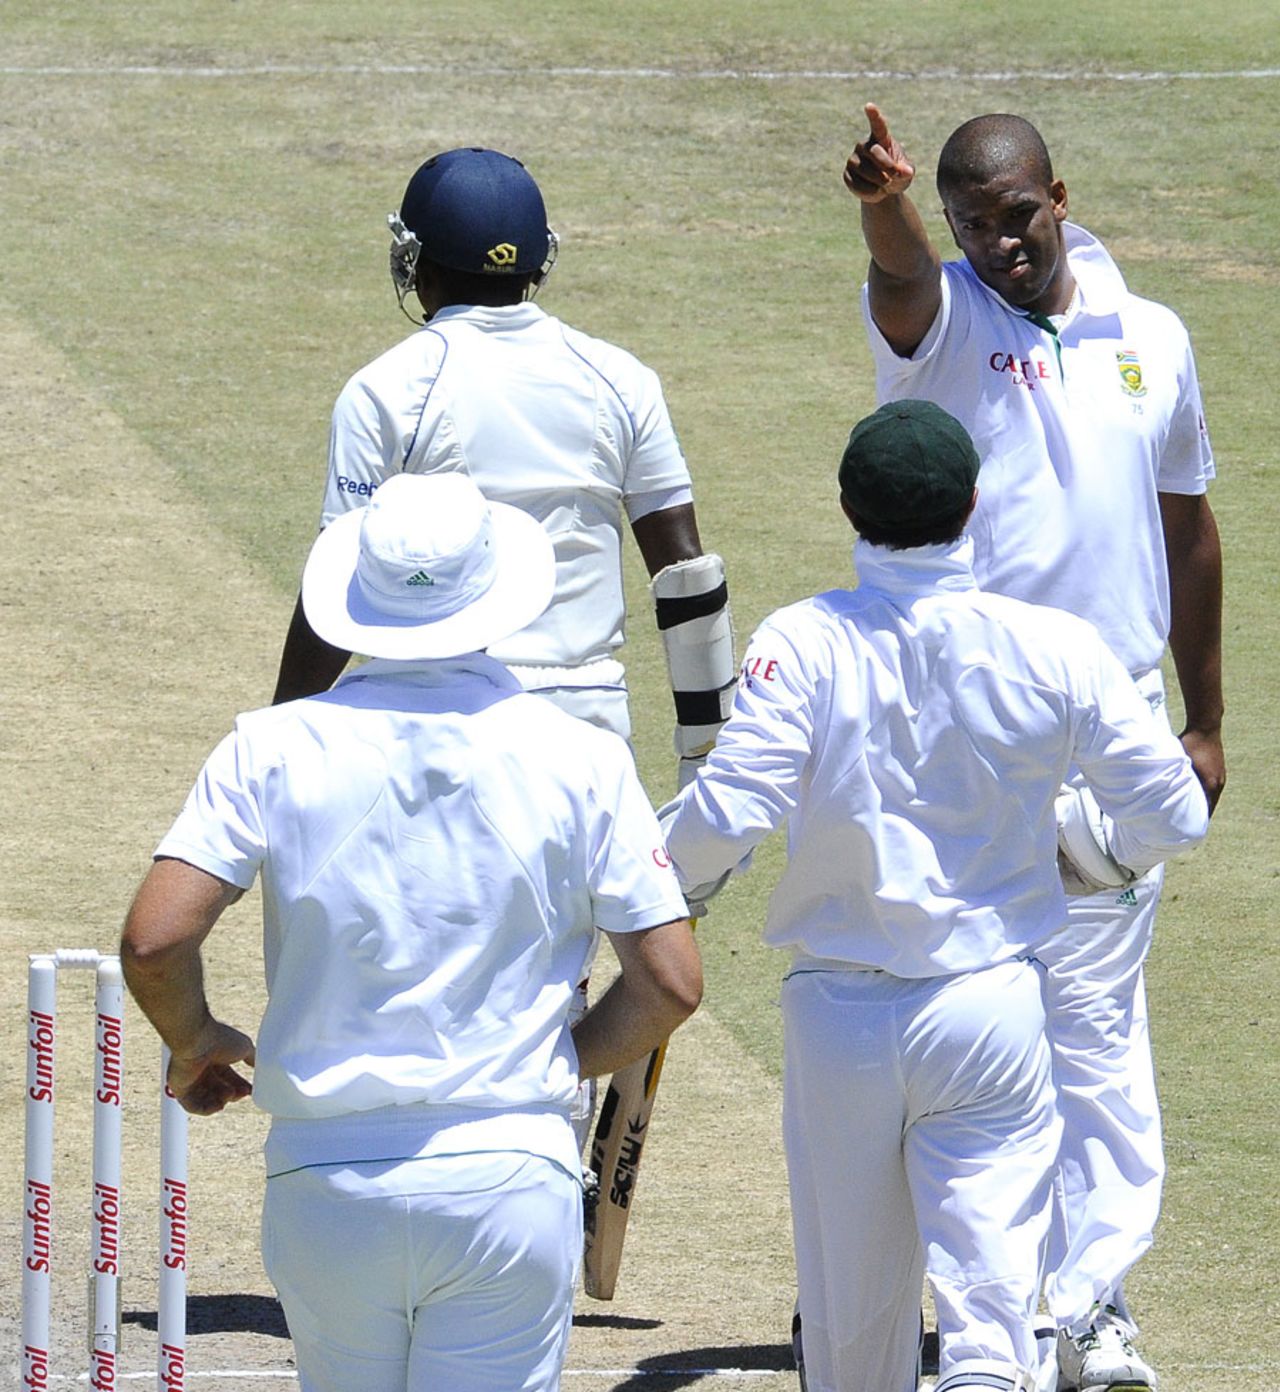 Vernon Philander shows Rangana Herath the way to the dressing room, South Africa v Sri Lanka, 3rd Test, Cape Town, 3rd day, January 5, 2012